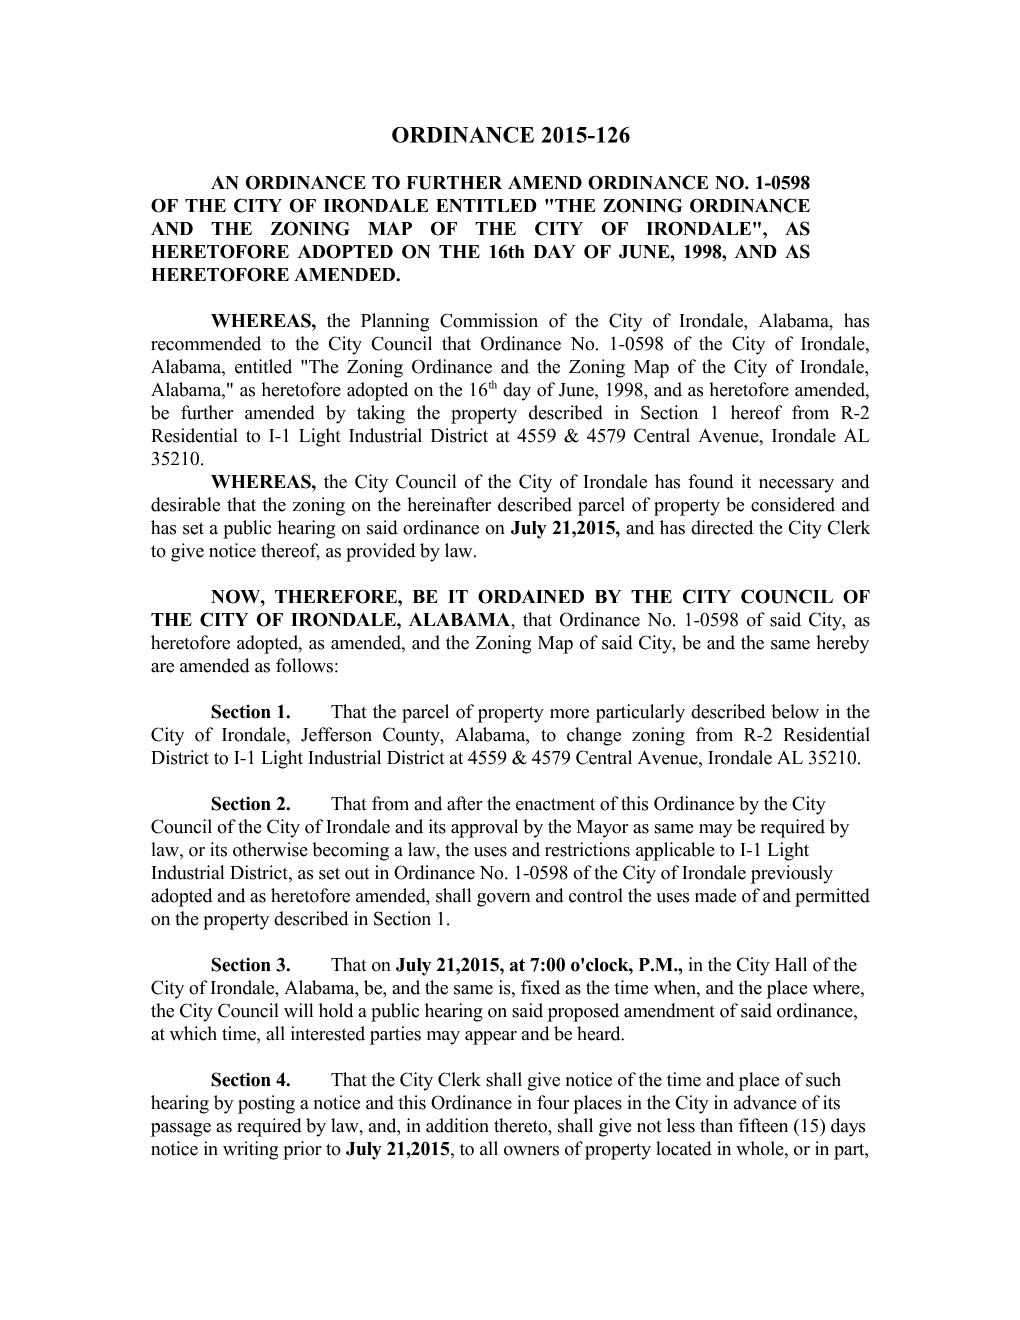 An Ordinance to Further Amend Ordinance No. 1-0598 of the City of Irondale Entitled The